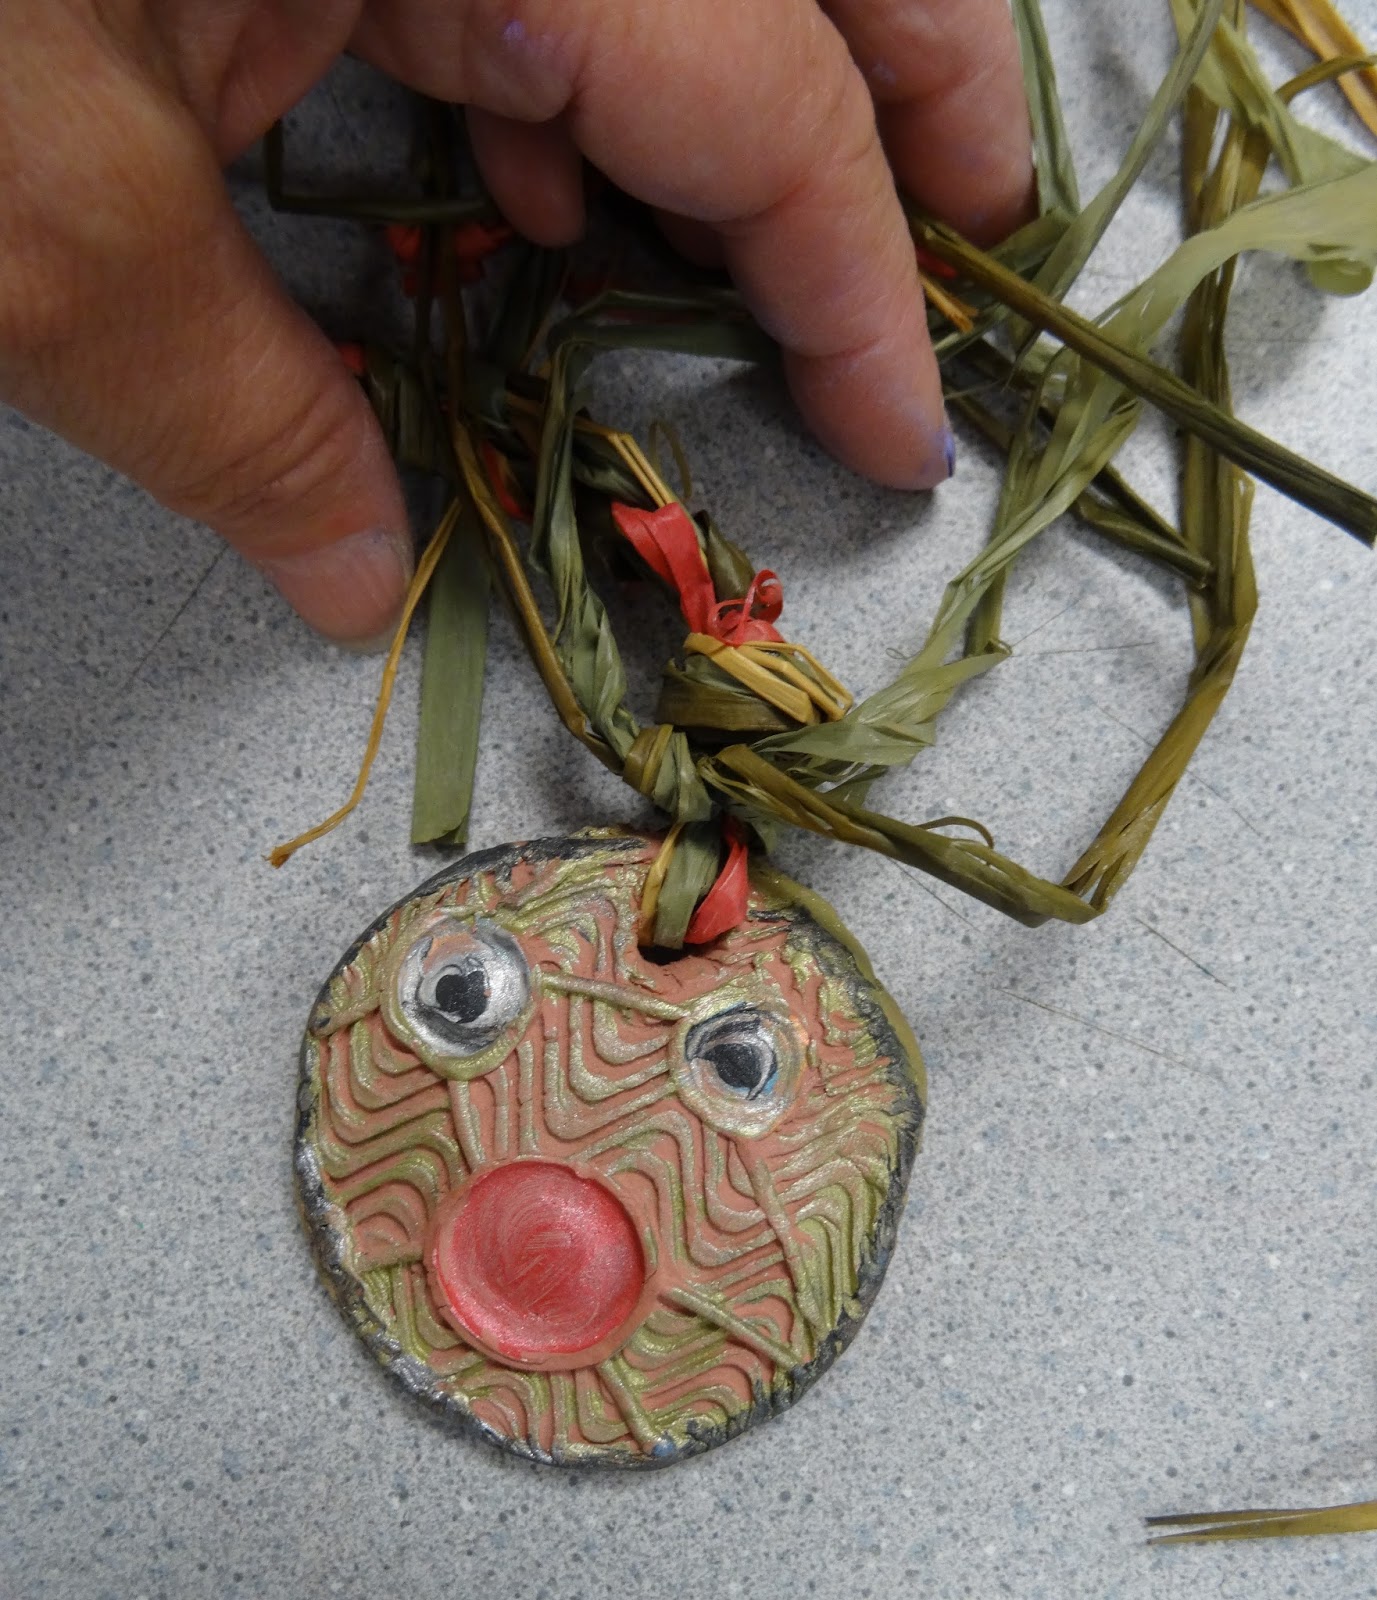 The Pros and Cons of Working With Air Dry Clay - The Art of Education  University